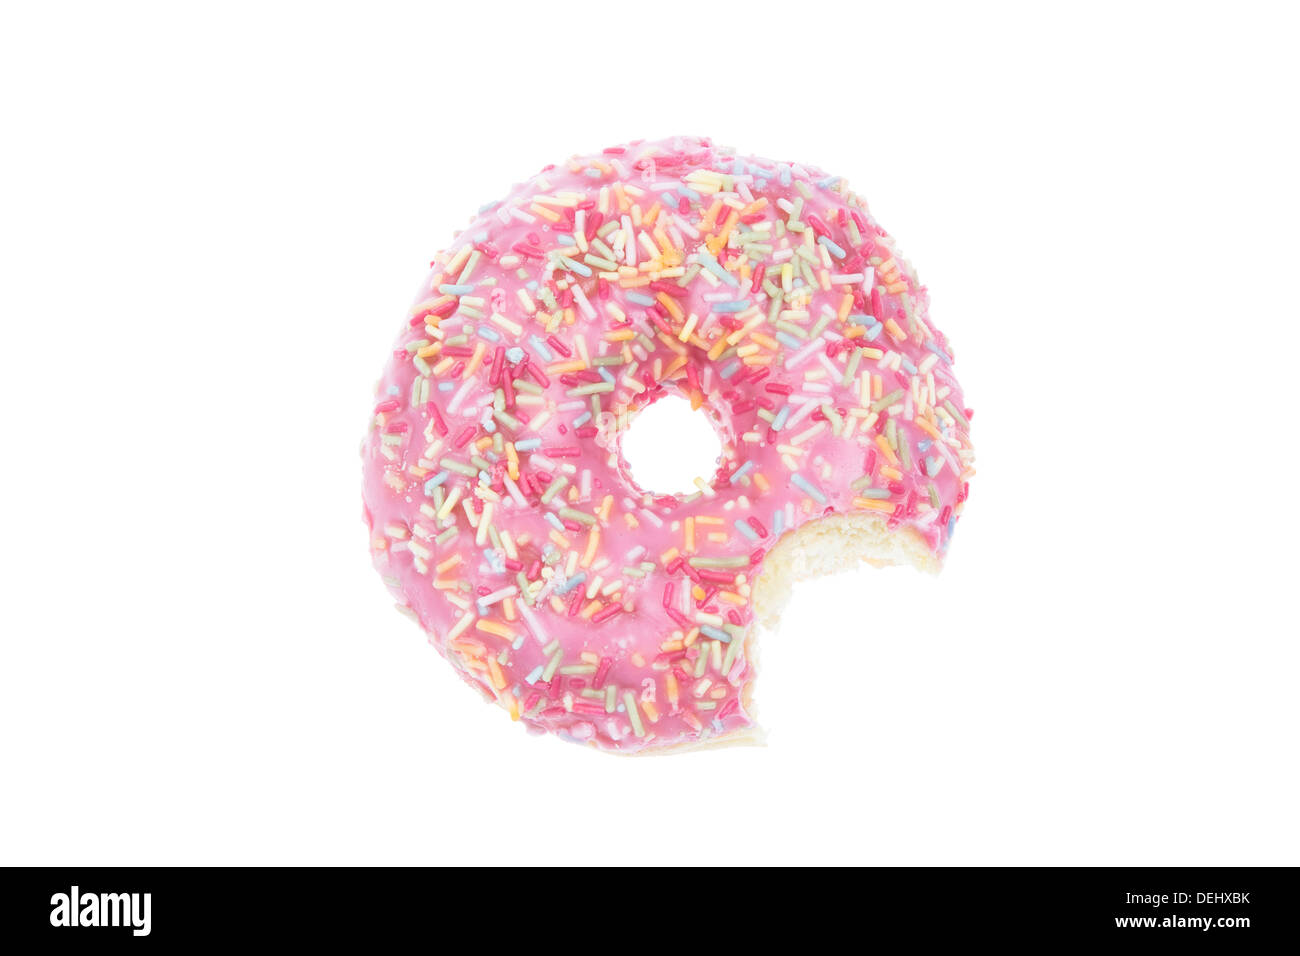 Donut with bite, pink glazed, pictured from above and isolated on white background Stock Photo